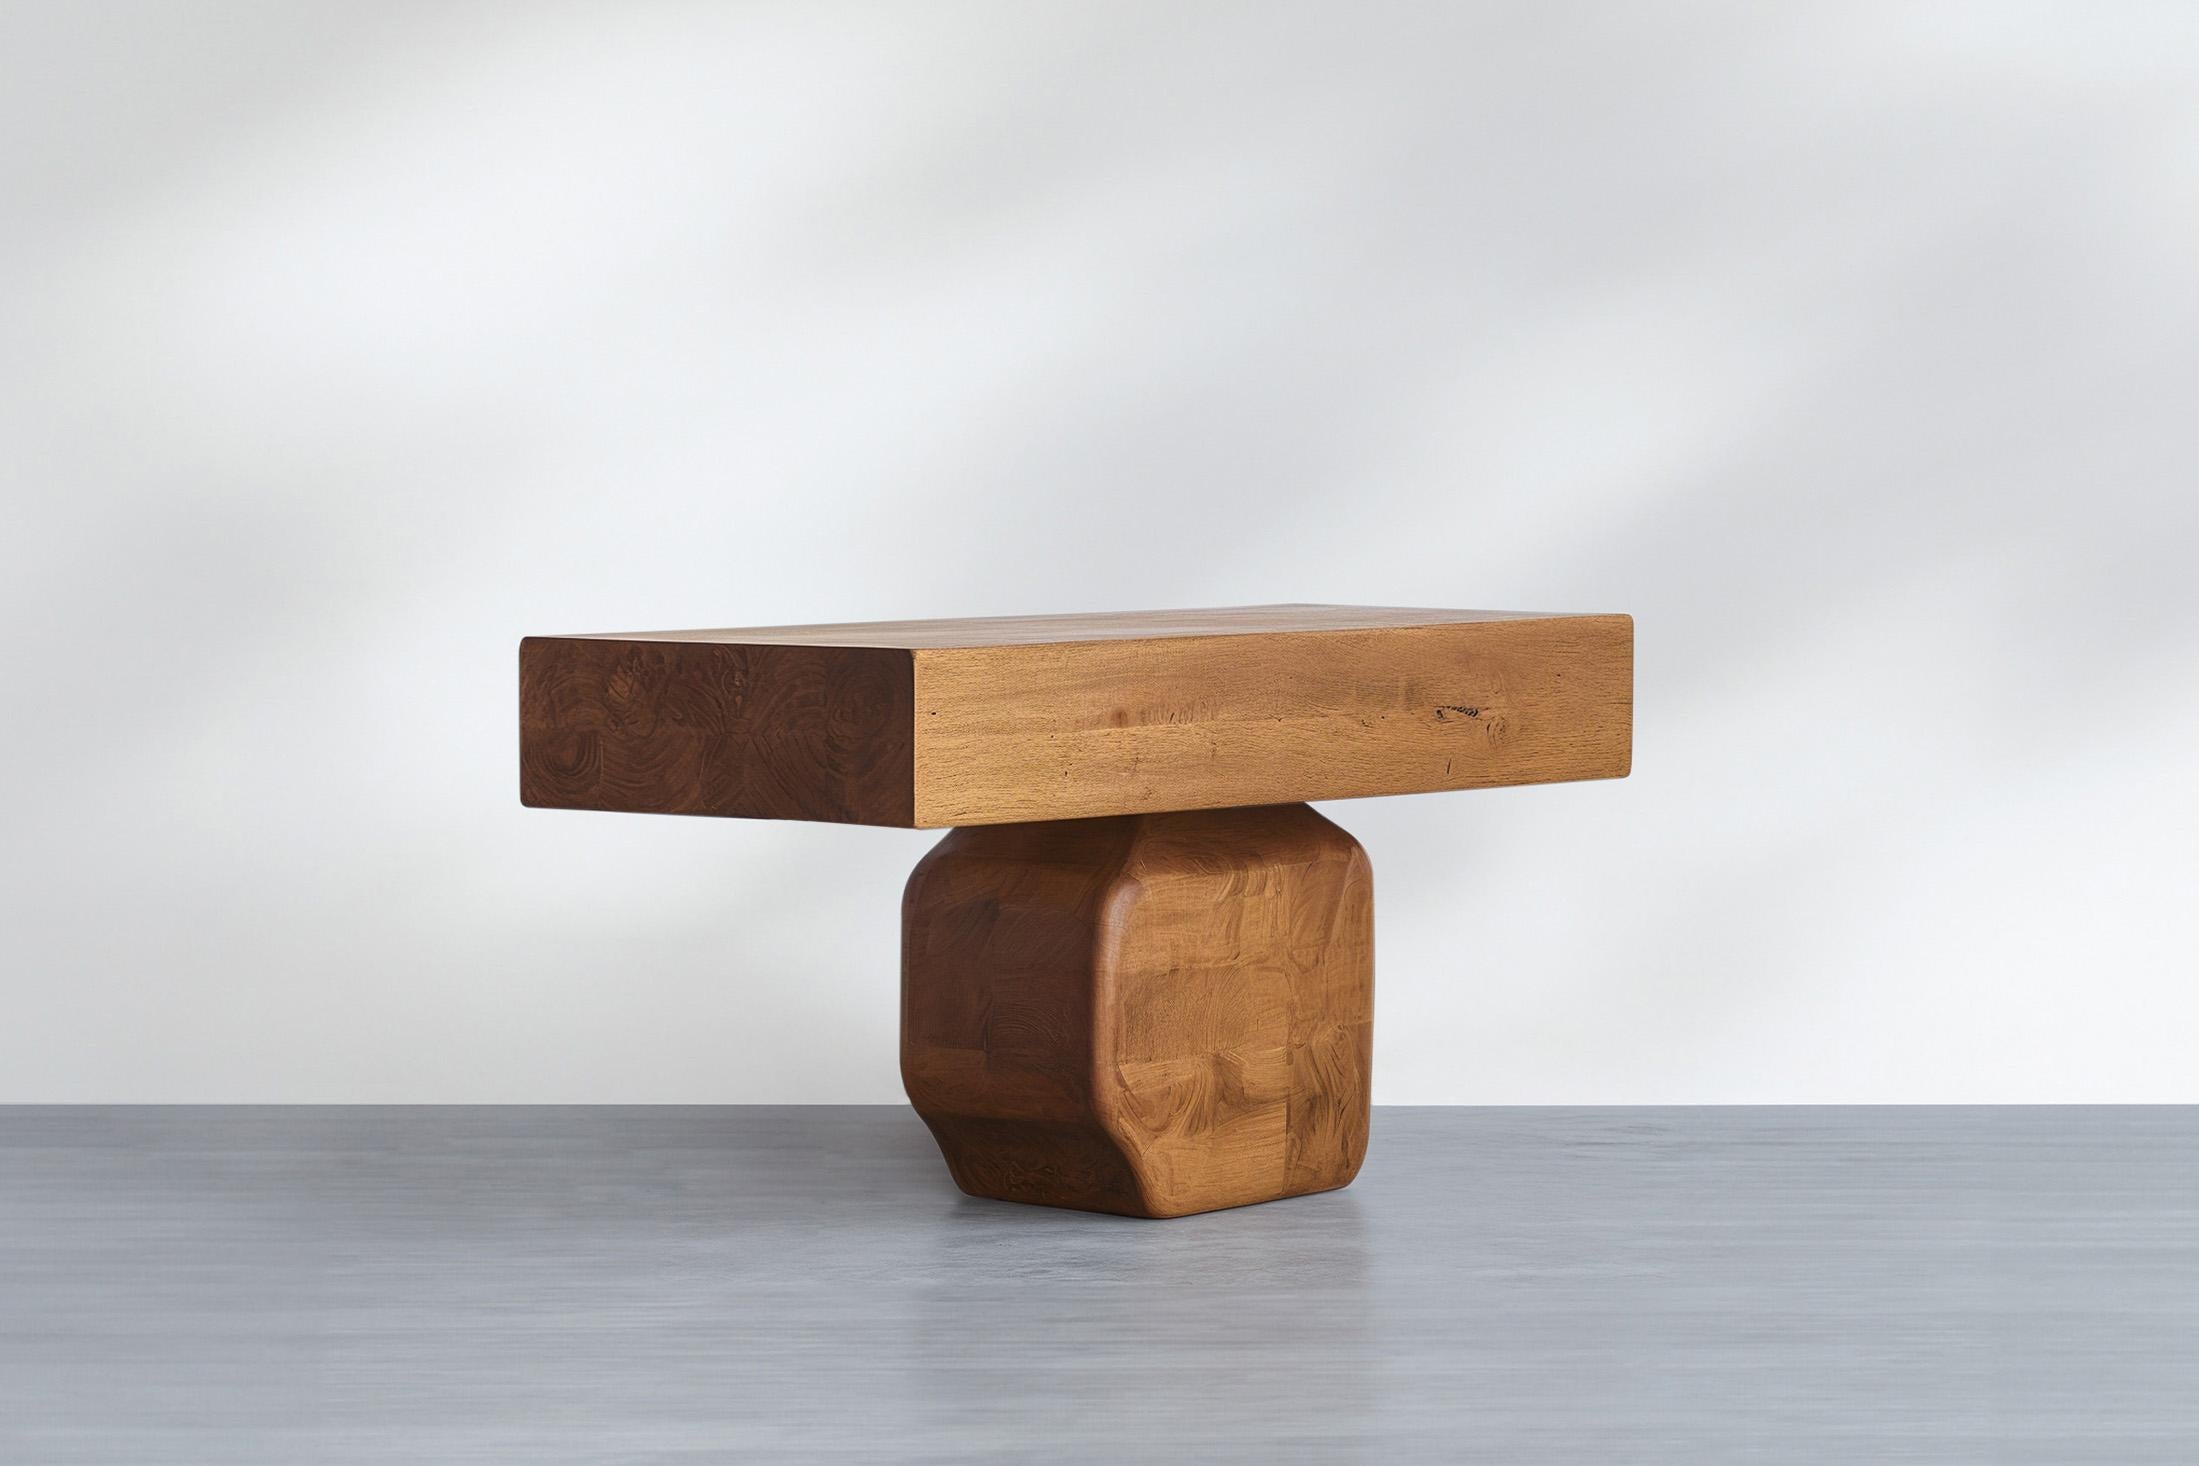 NONO Elefante Foyer Table 09, Oak Precision, Minimalist Elegance—————————————————————
Elefante Collection: A Harmony of Design and Heritage by NONO

Crafting Elegance with a Modernist Touch

NONO, renowned for its decade-long journey in redefining